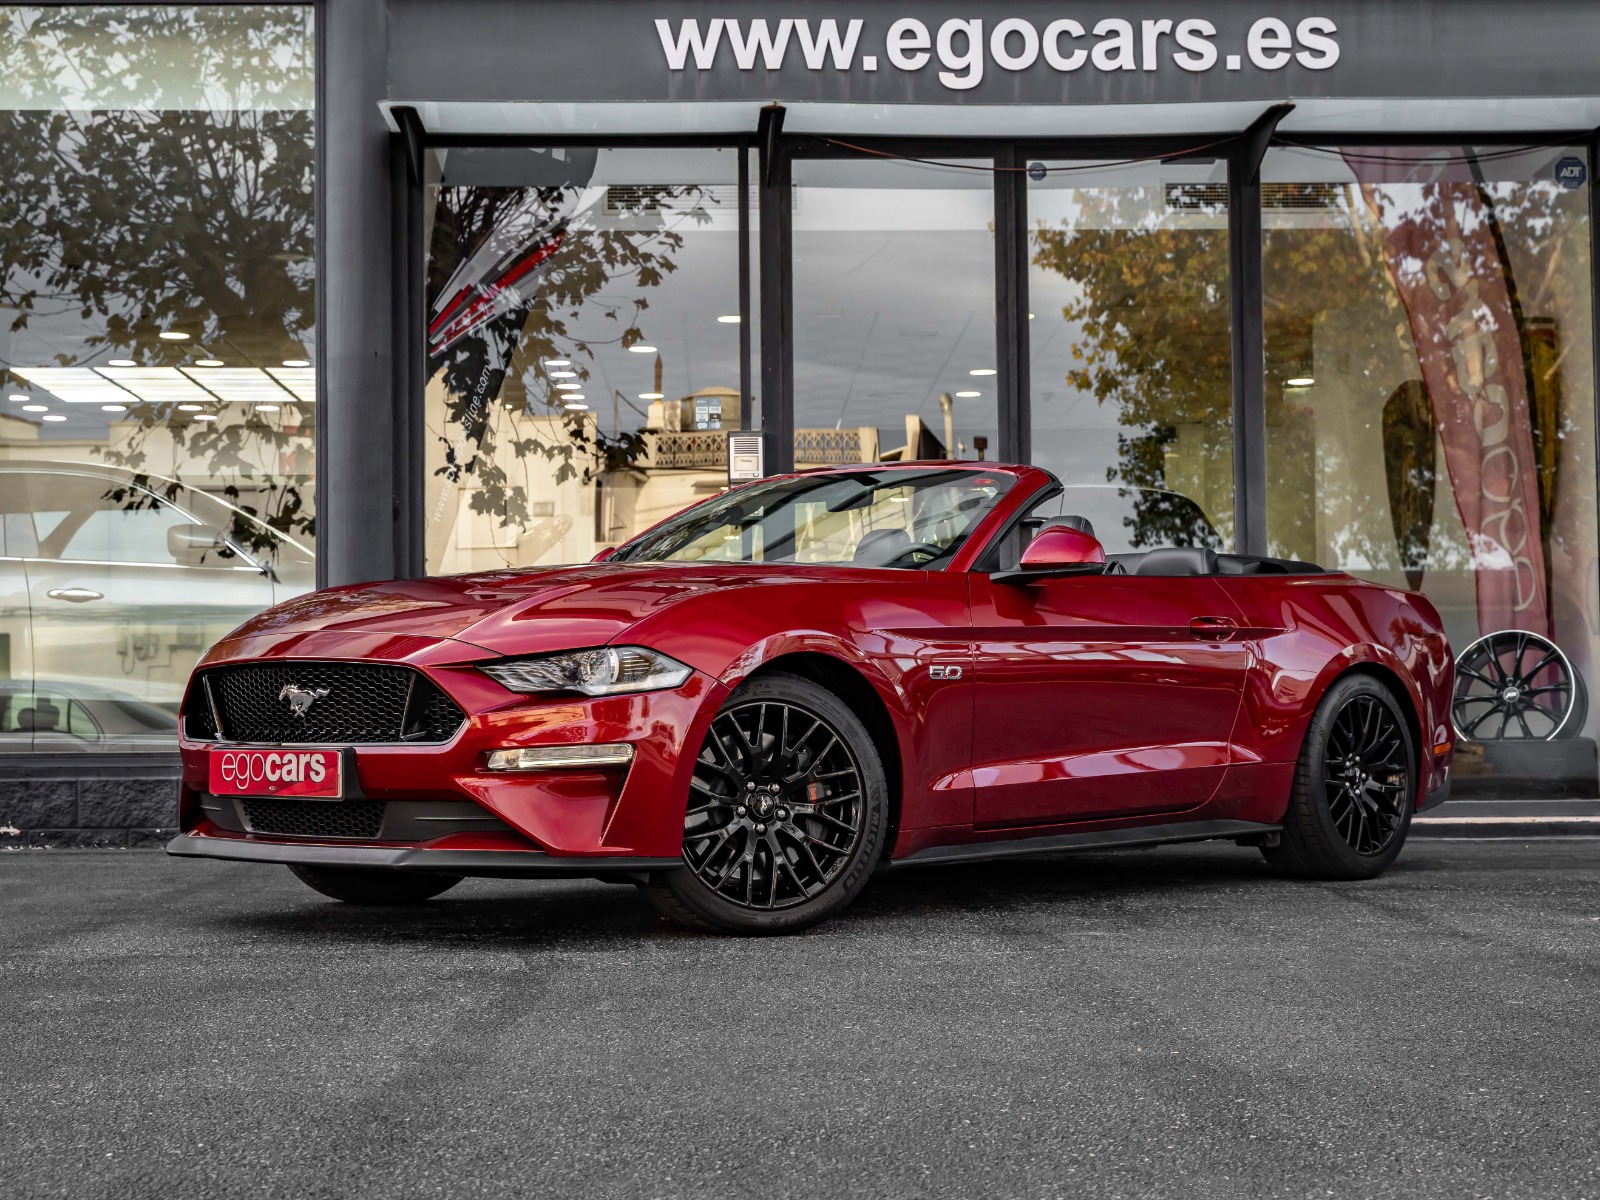 FORD MUSTANG GT CONVERTIBLE - EGOCARS (1)